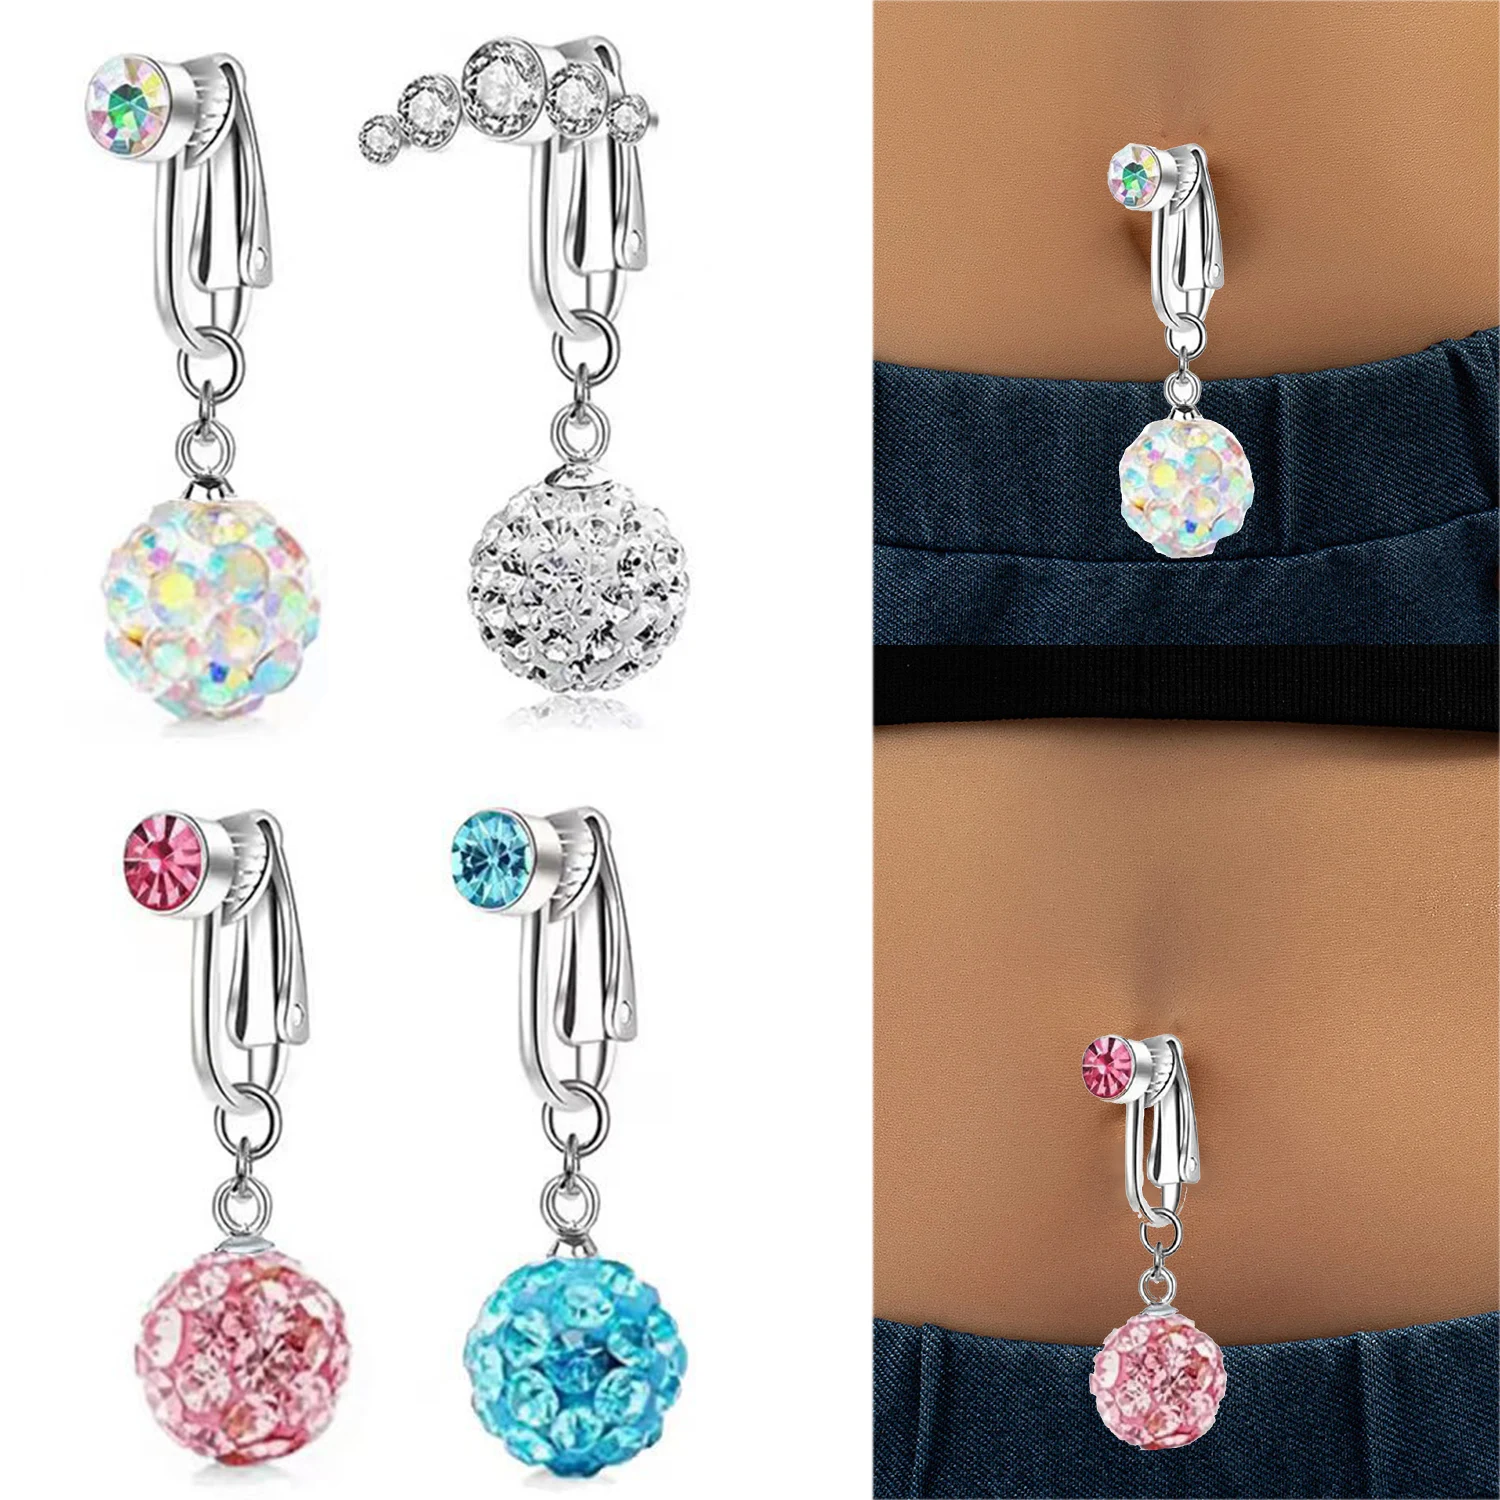 Faux Fake Belly Piercing Crystal Balls Dangling Long Fake Belly Button Piercings Clip On Umbilical Navel Cartilage Earrings Clip